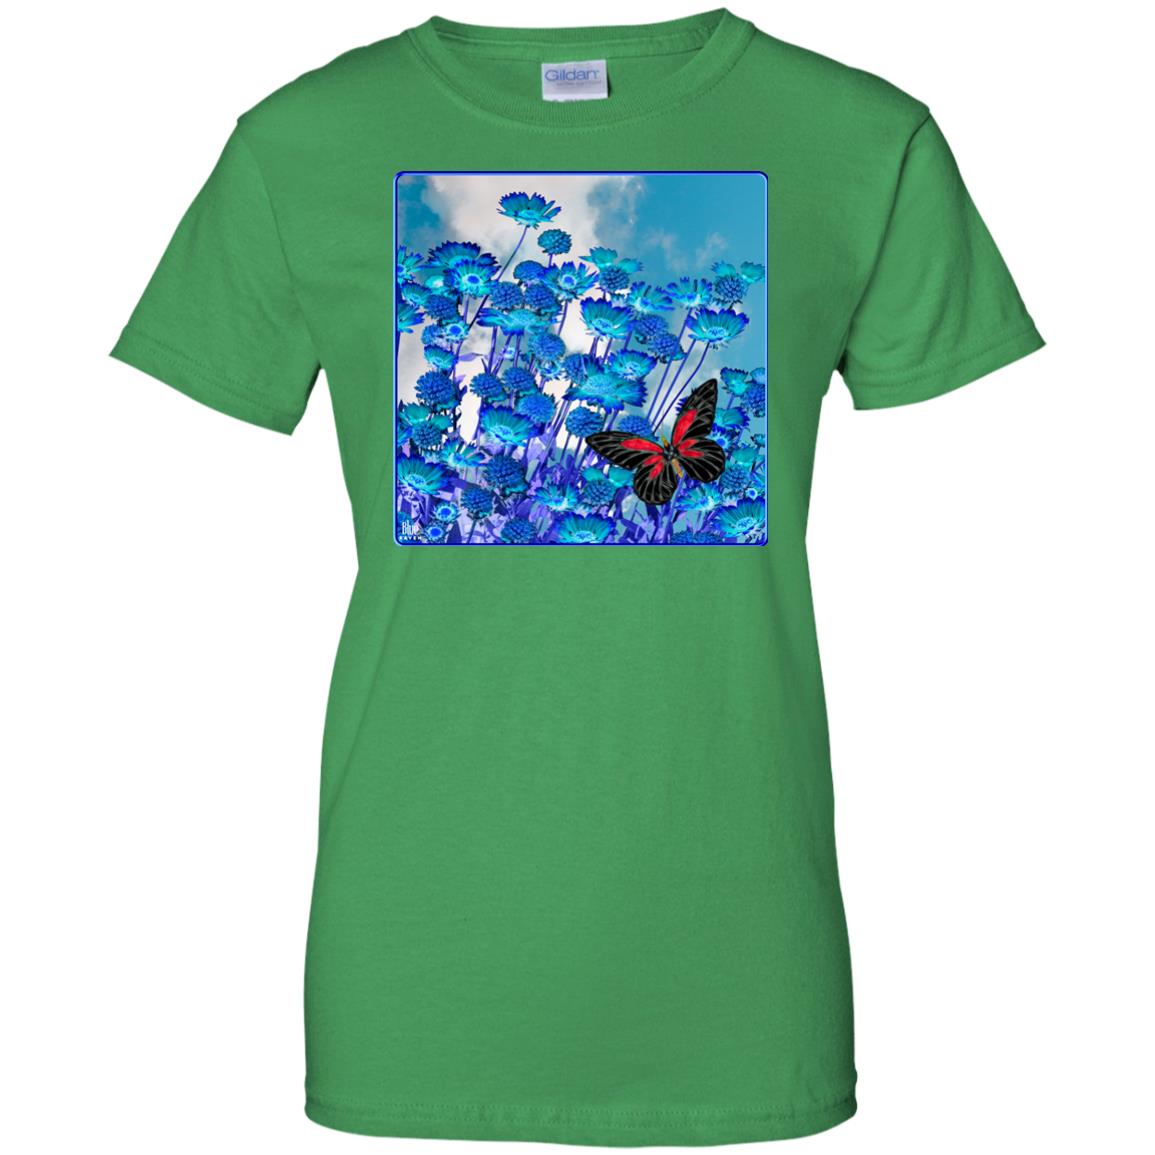 Blue Daisies - Women's Relaxed Fit T-Shirt